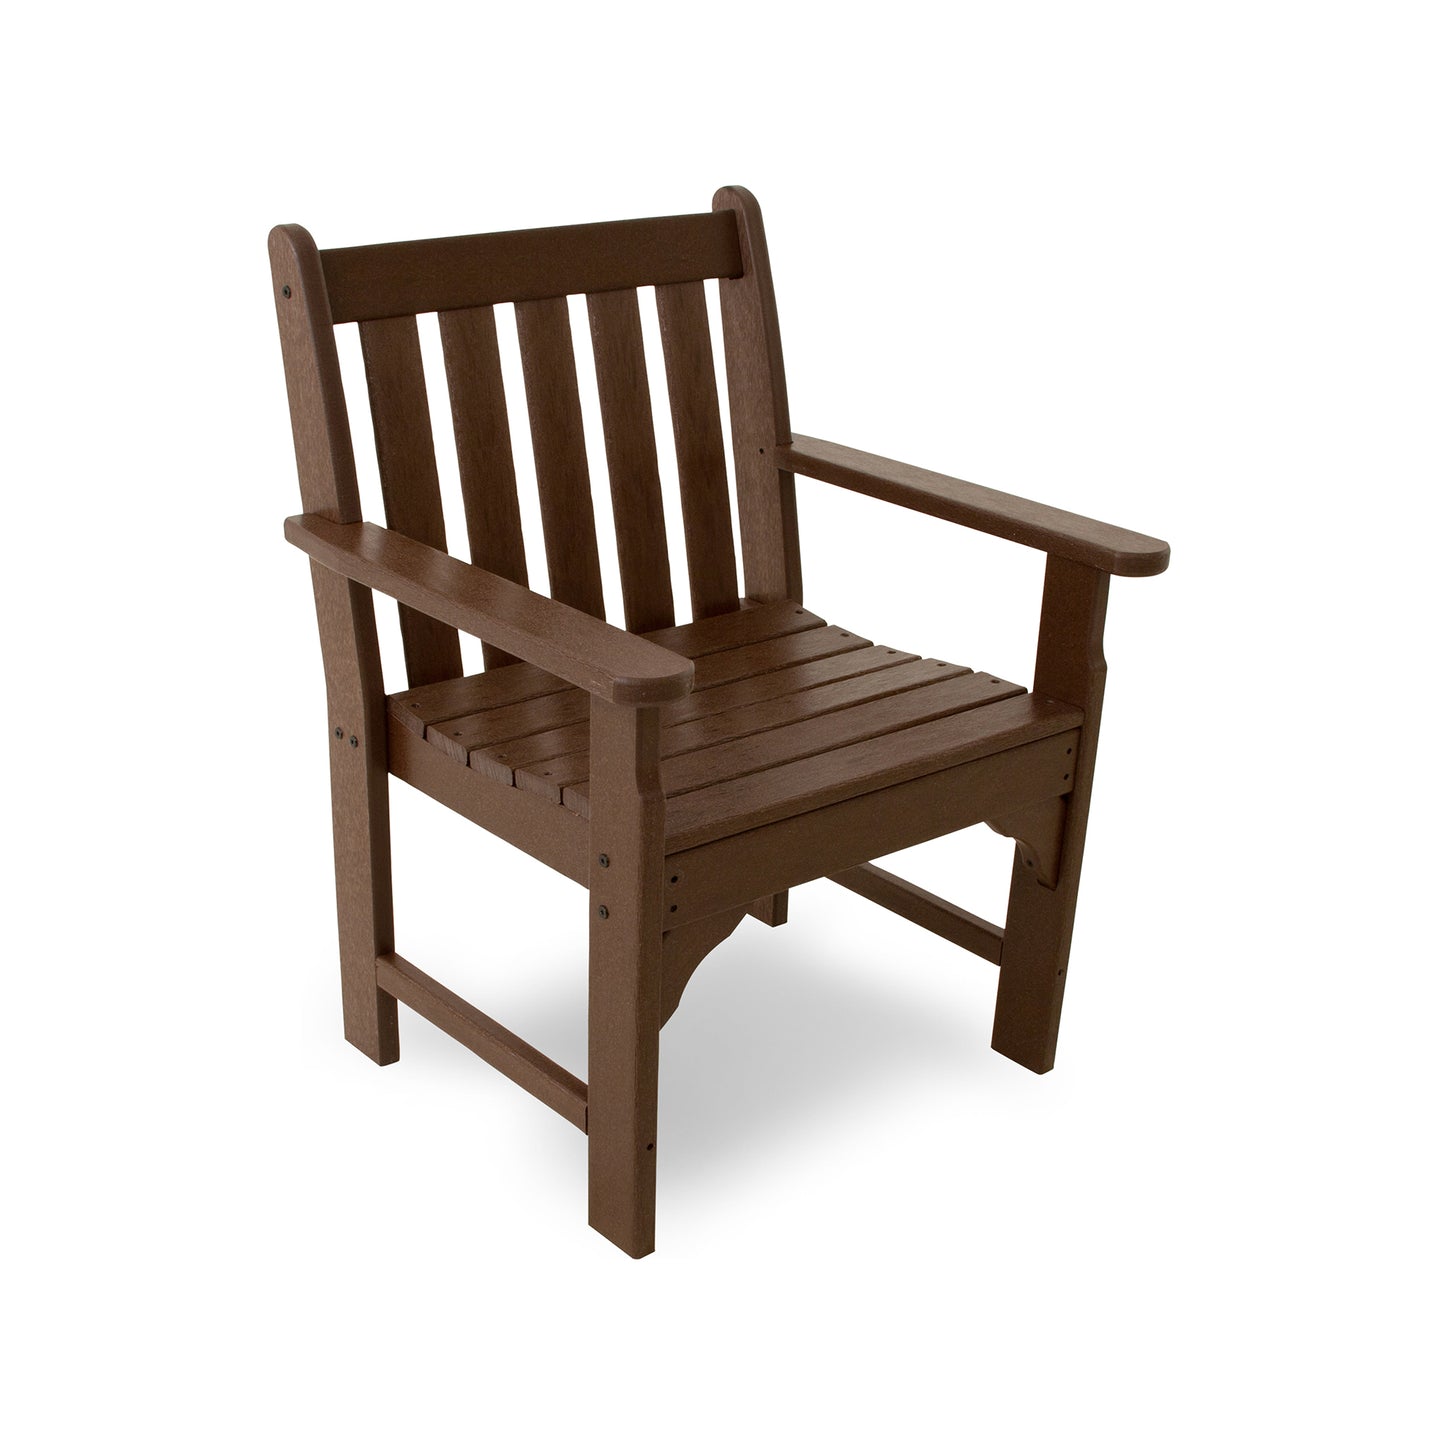 A single brown POLYWOOD Vineyard Arm Chair with a vertical slat back and seat, and wide armrests, isolated on a white background.